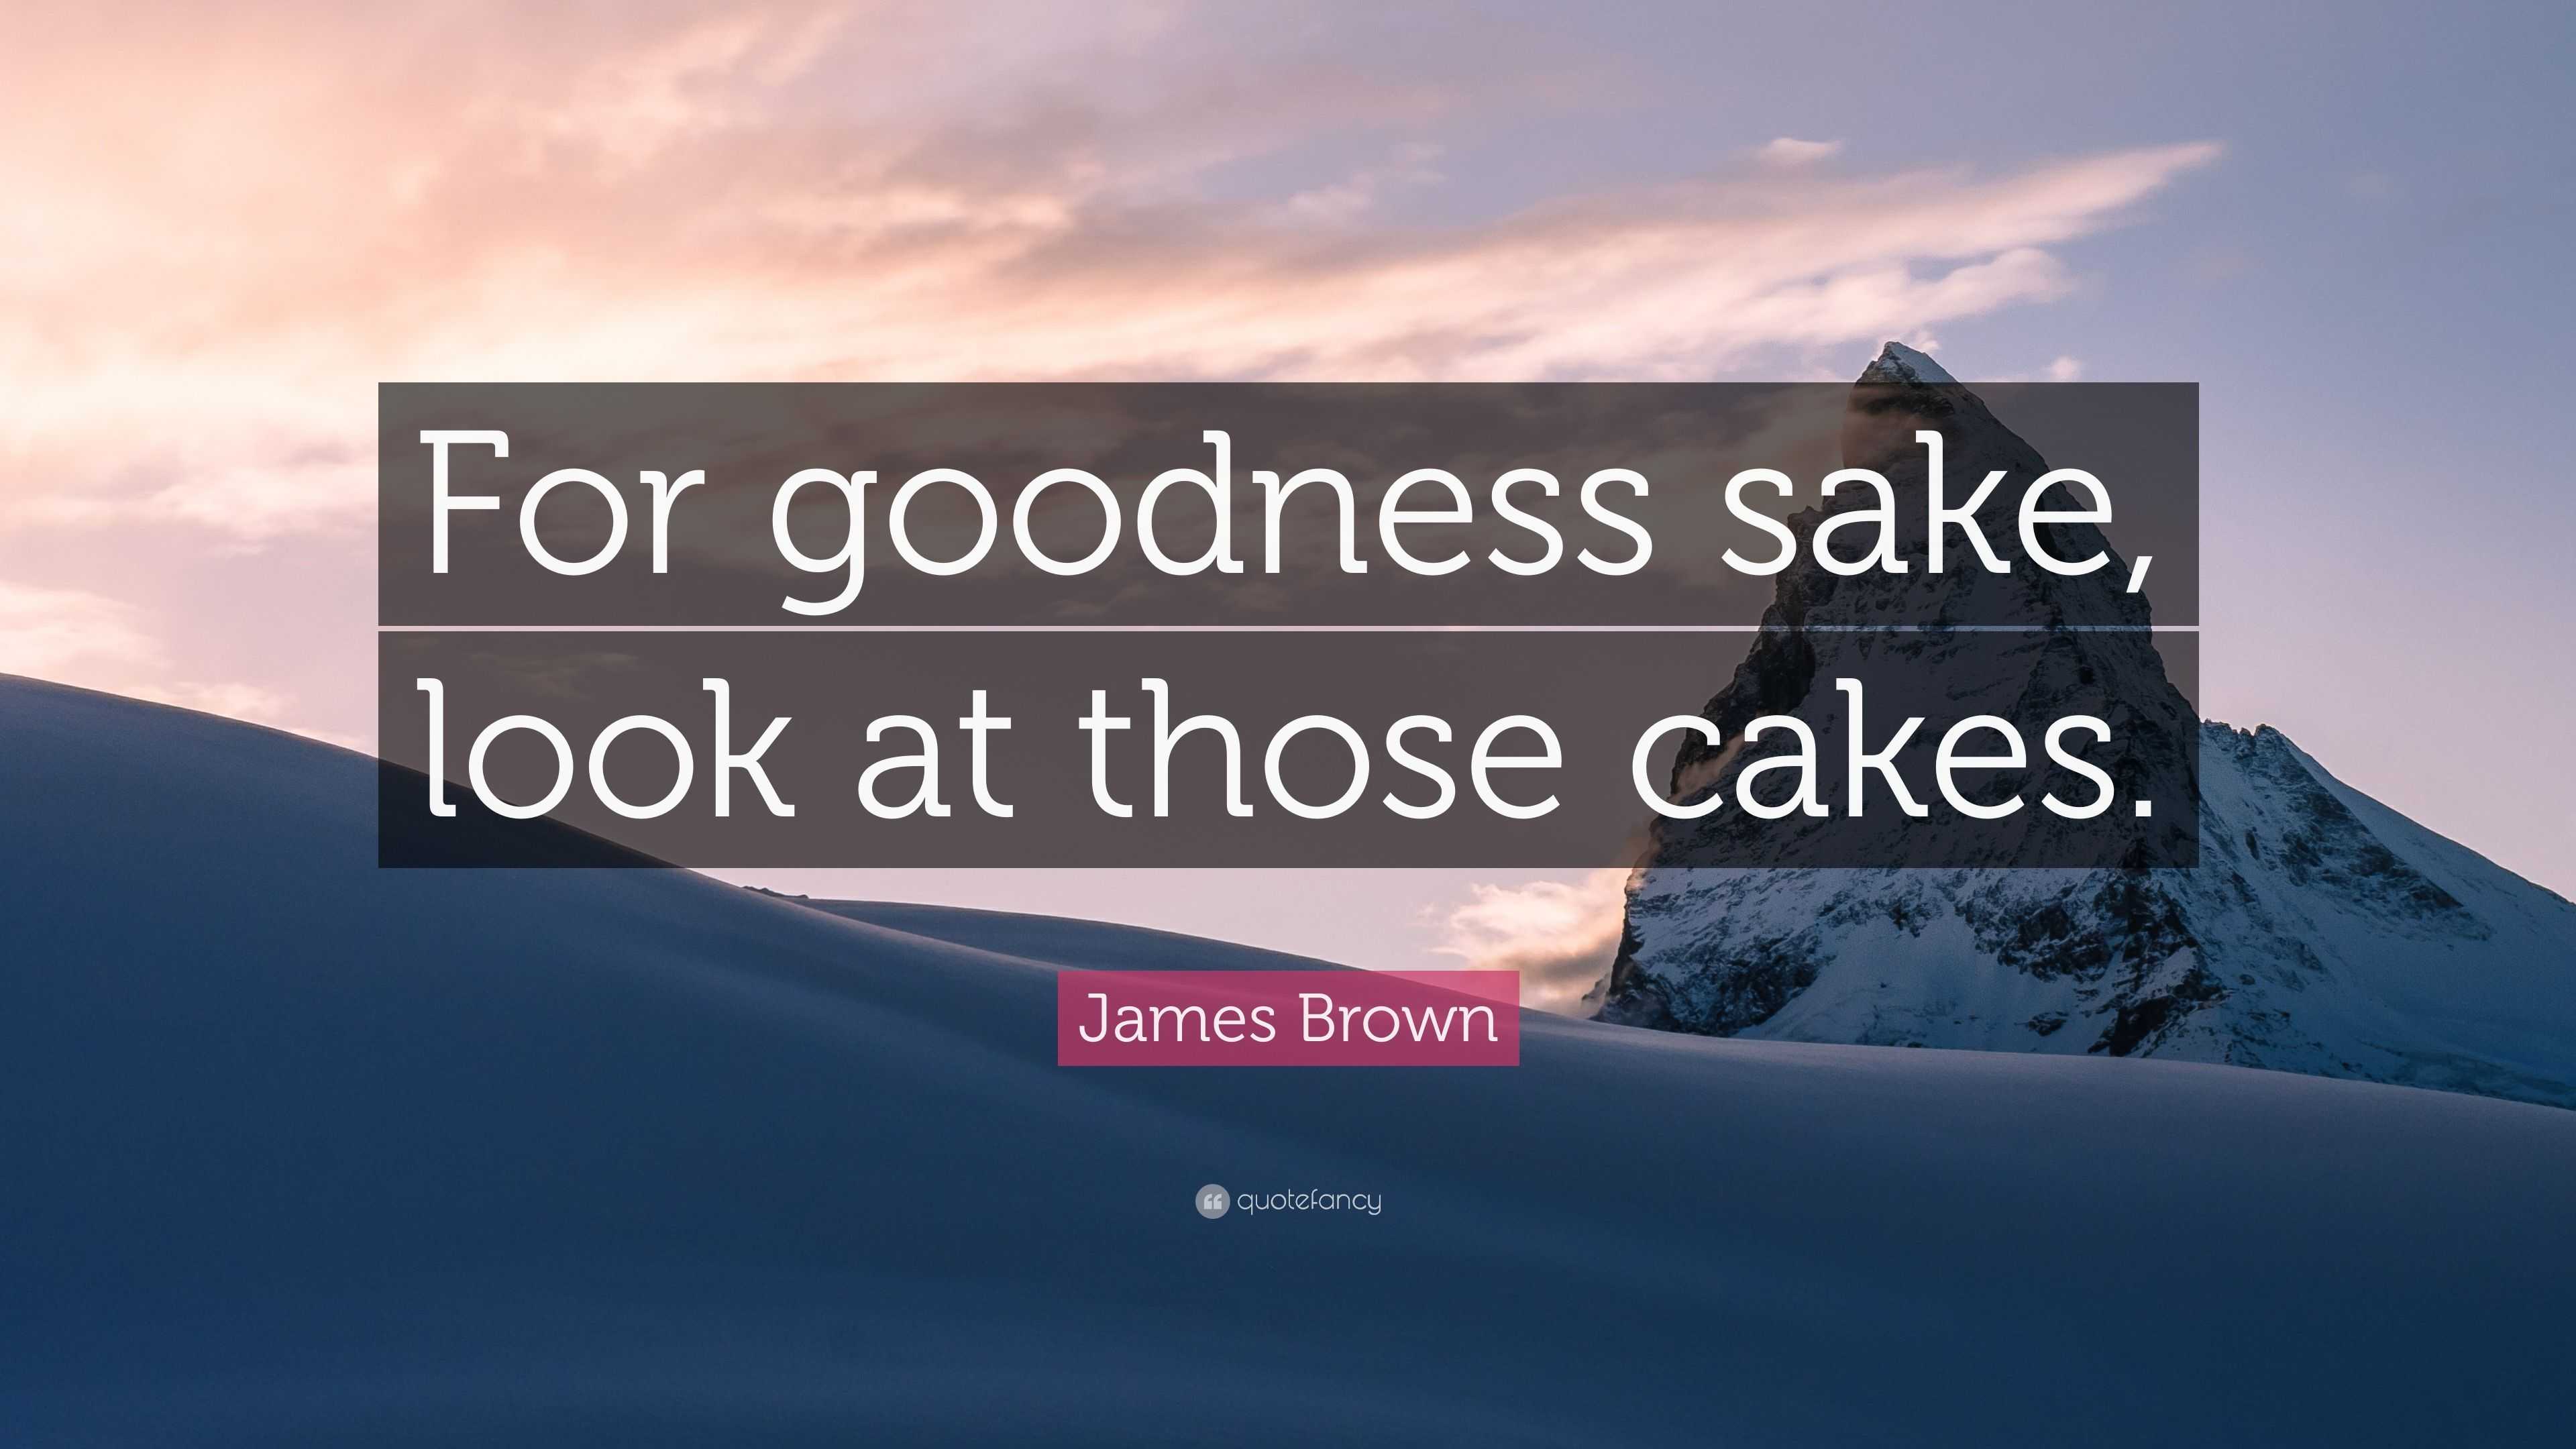 4469866 James Brown Quote For goodness sake look at those cakes